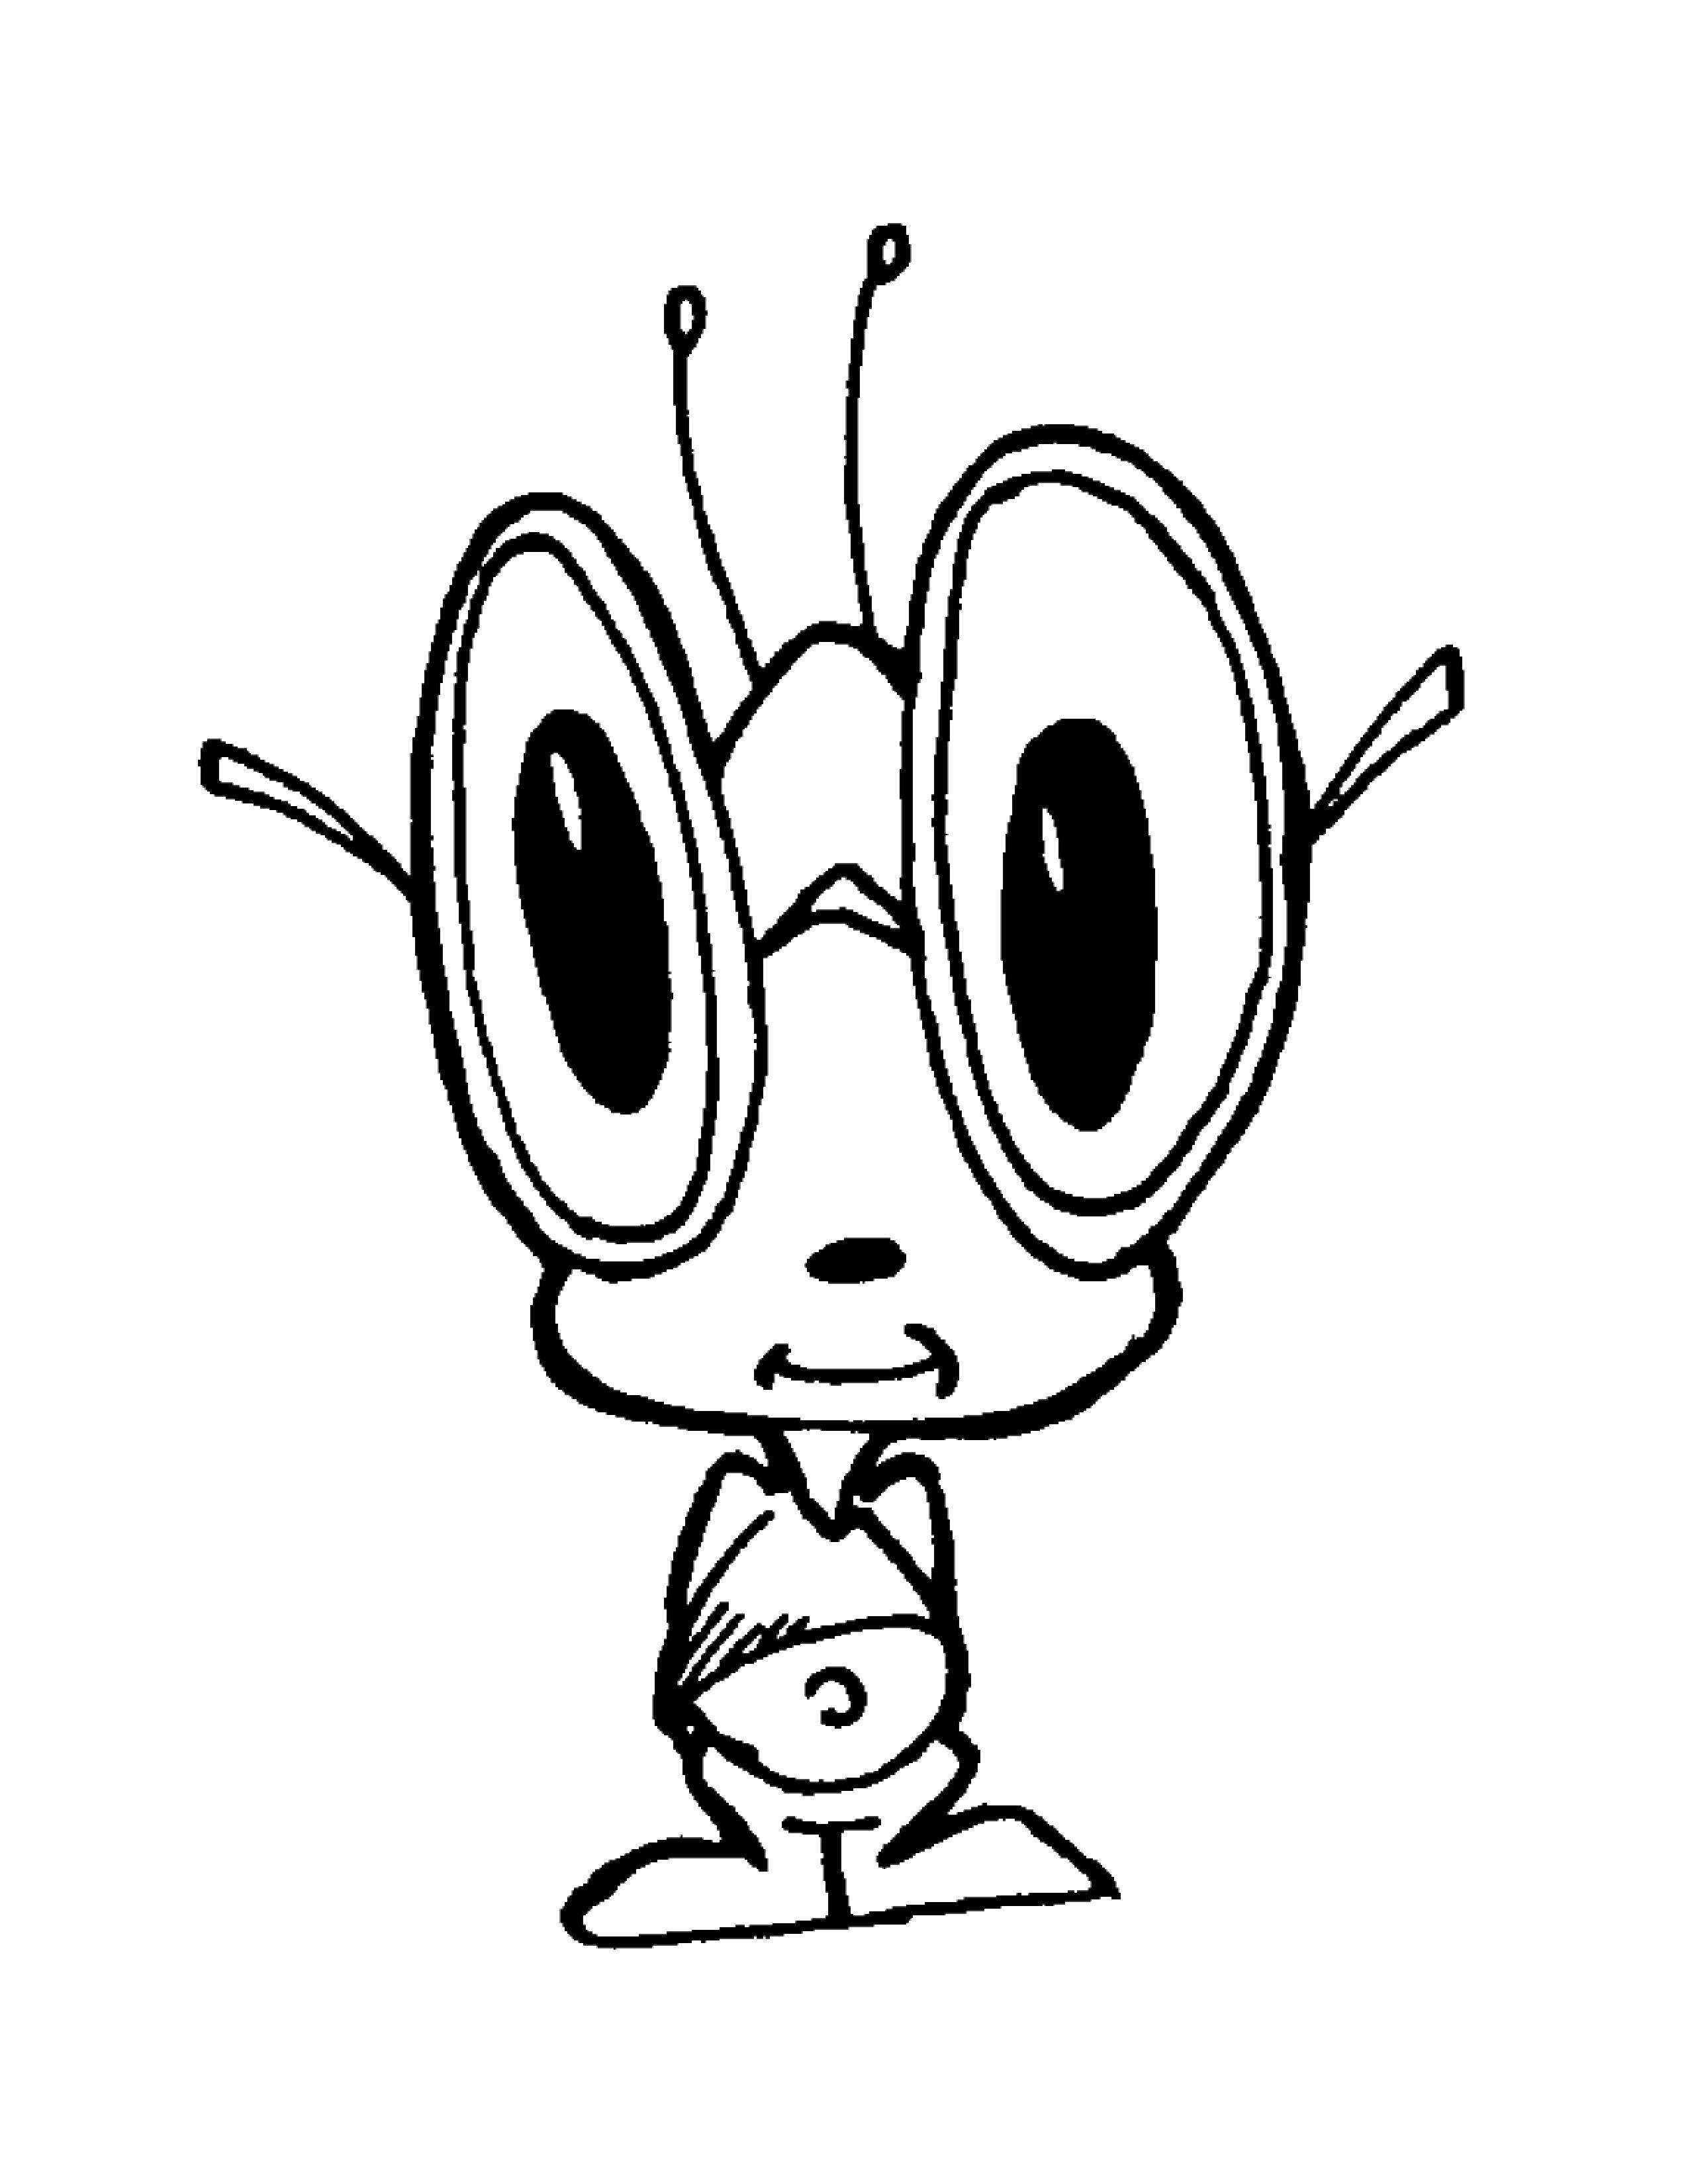 Coloring Ant with glasses. Category Insects. Tags:  Insects, ant.